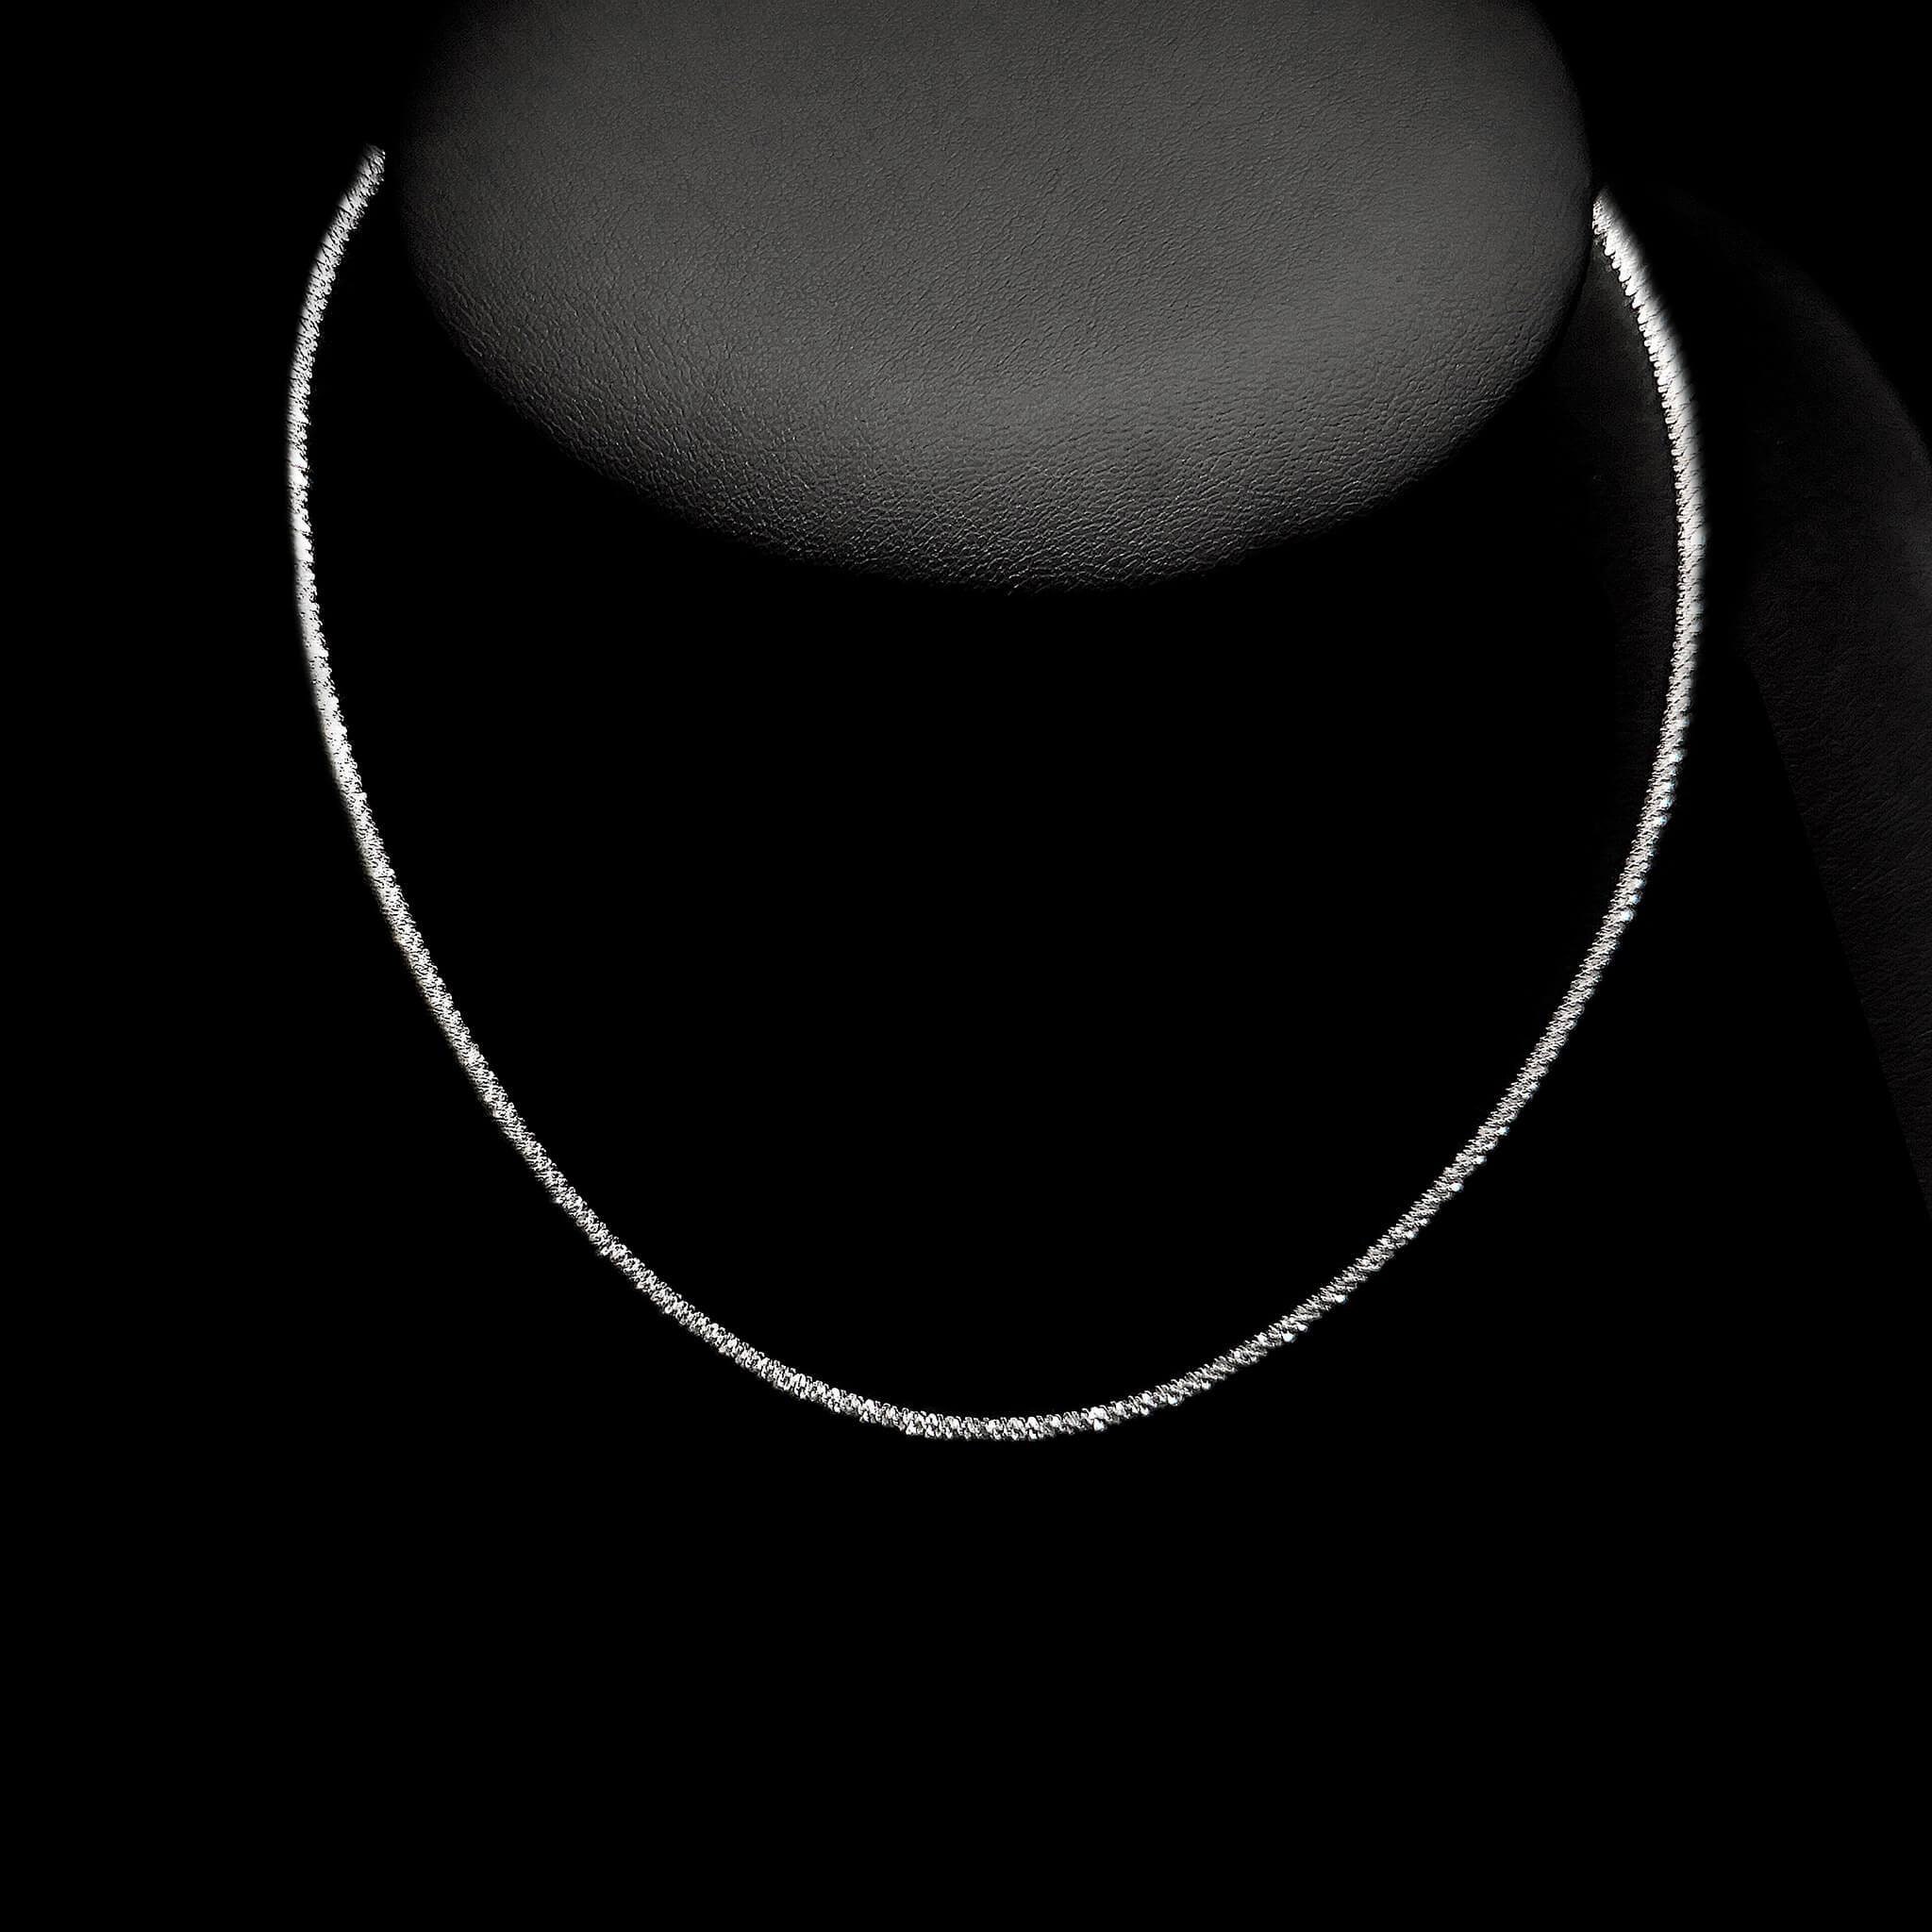 Silver Chain loops Sterling Silver Jewelry Birthday Gift Mom Gift ...